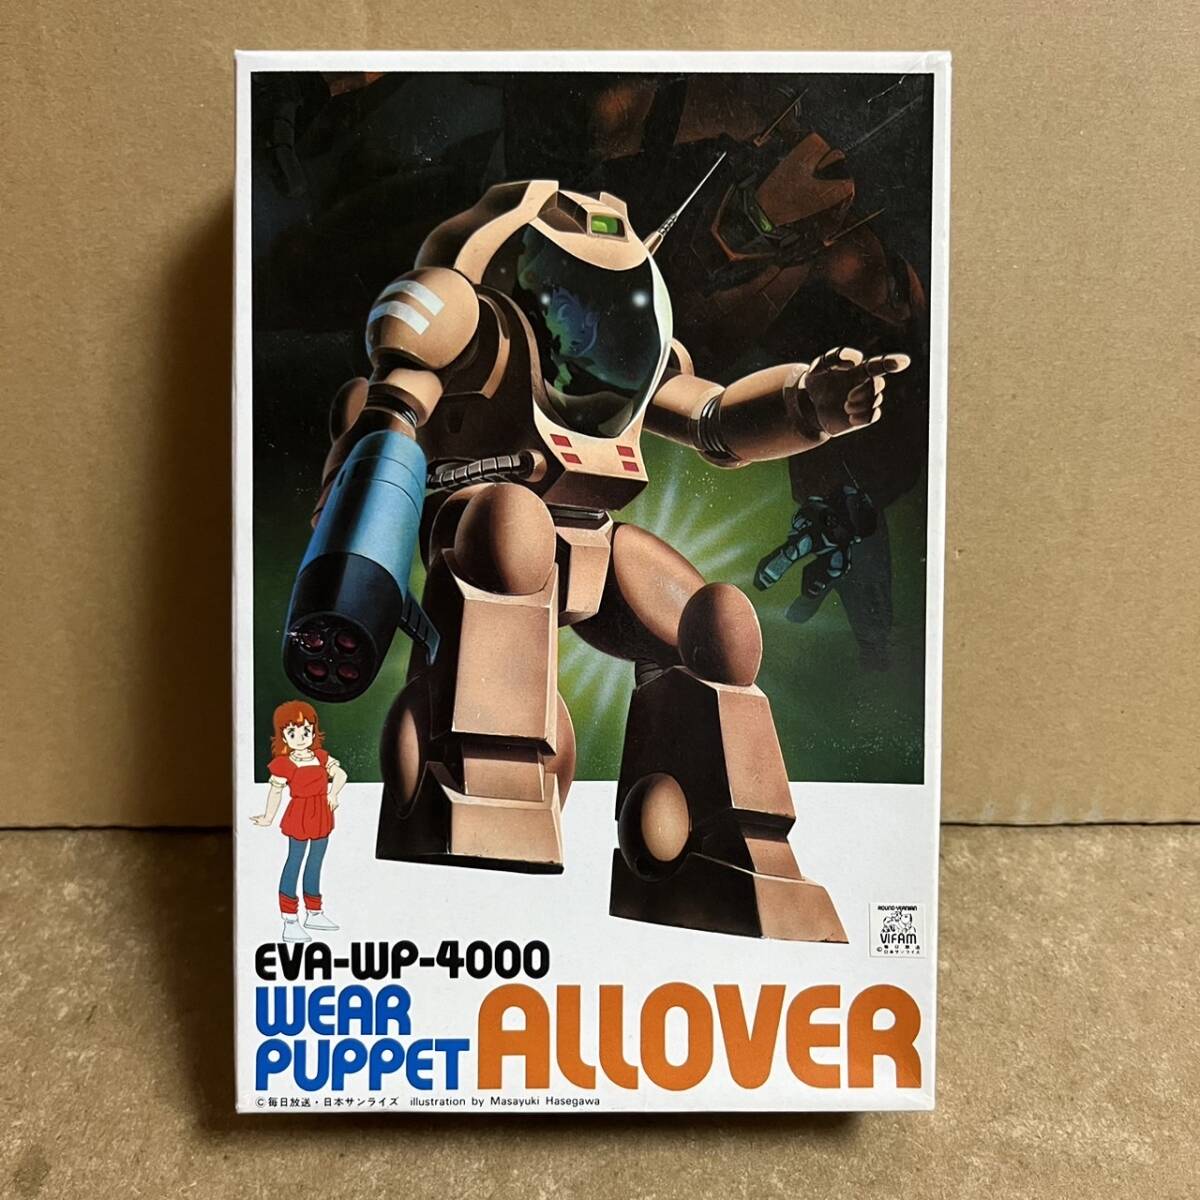  valuable! at that time mono old kit 1/24 all over! ( Ginga Hyouryuu Vifam wear puppet 